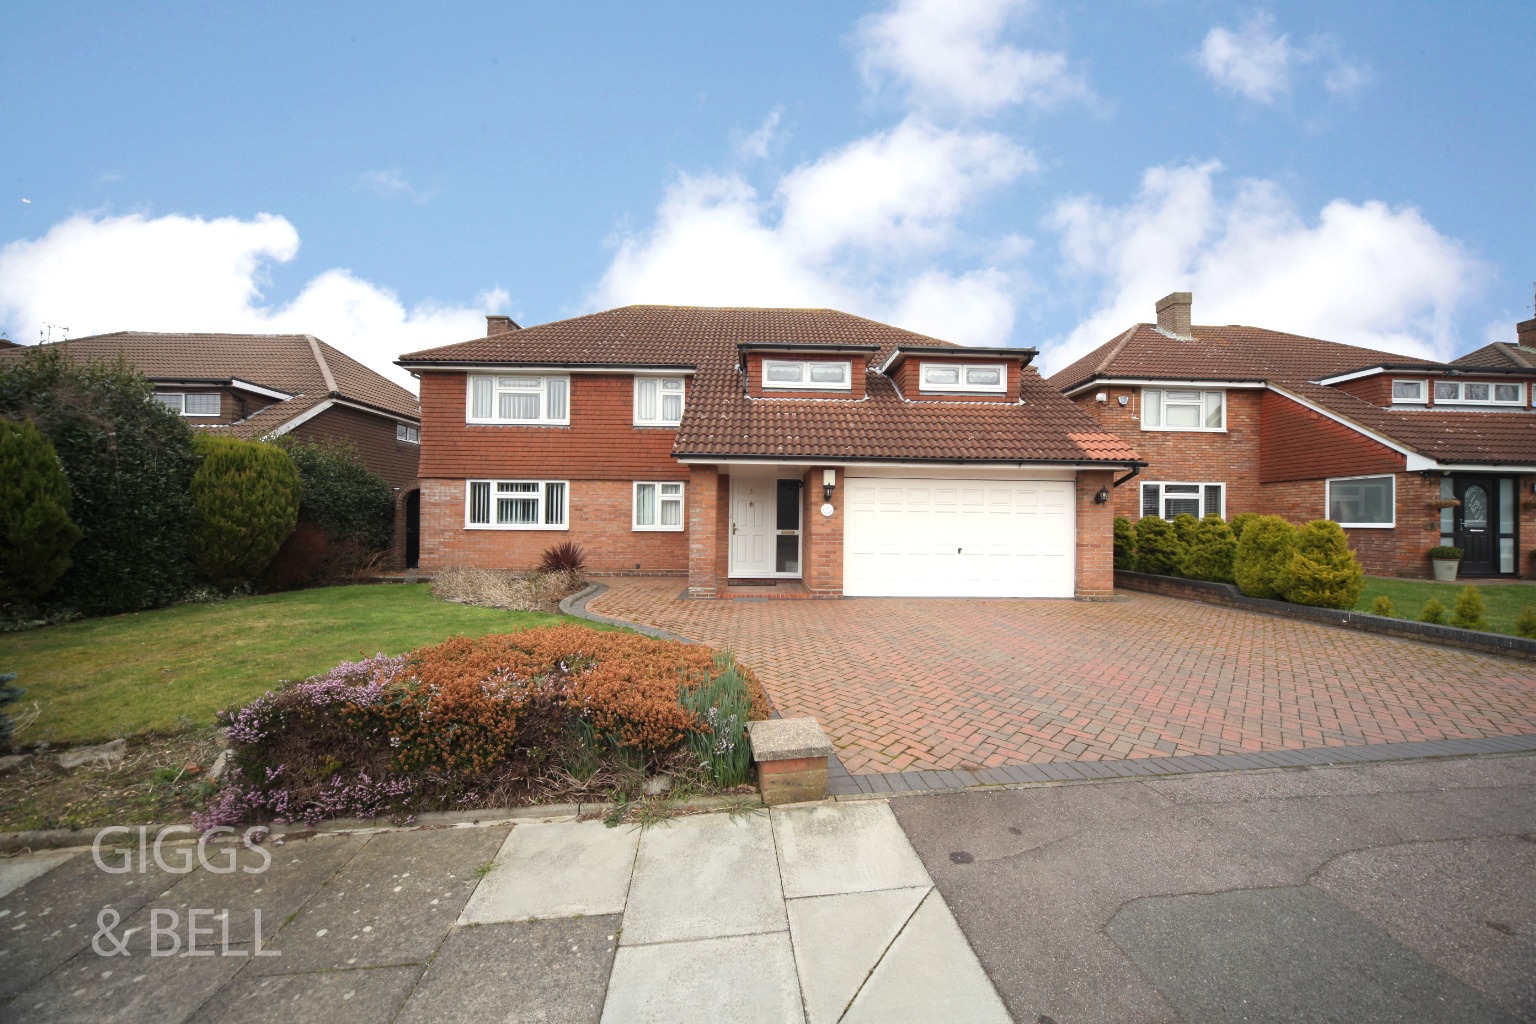 5 bed detached house for sale in Sunset Drive, Luton - Property Image 1